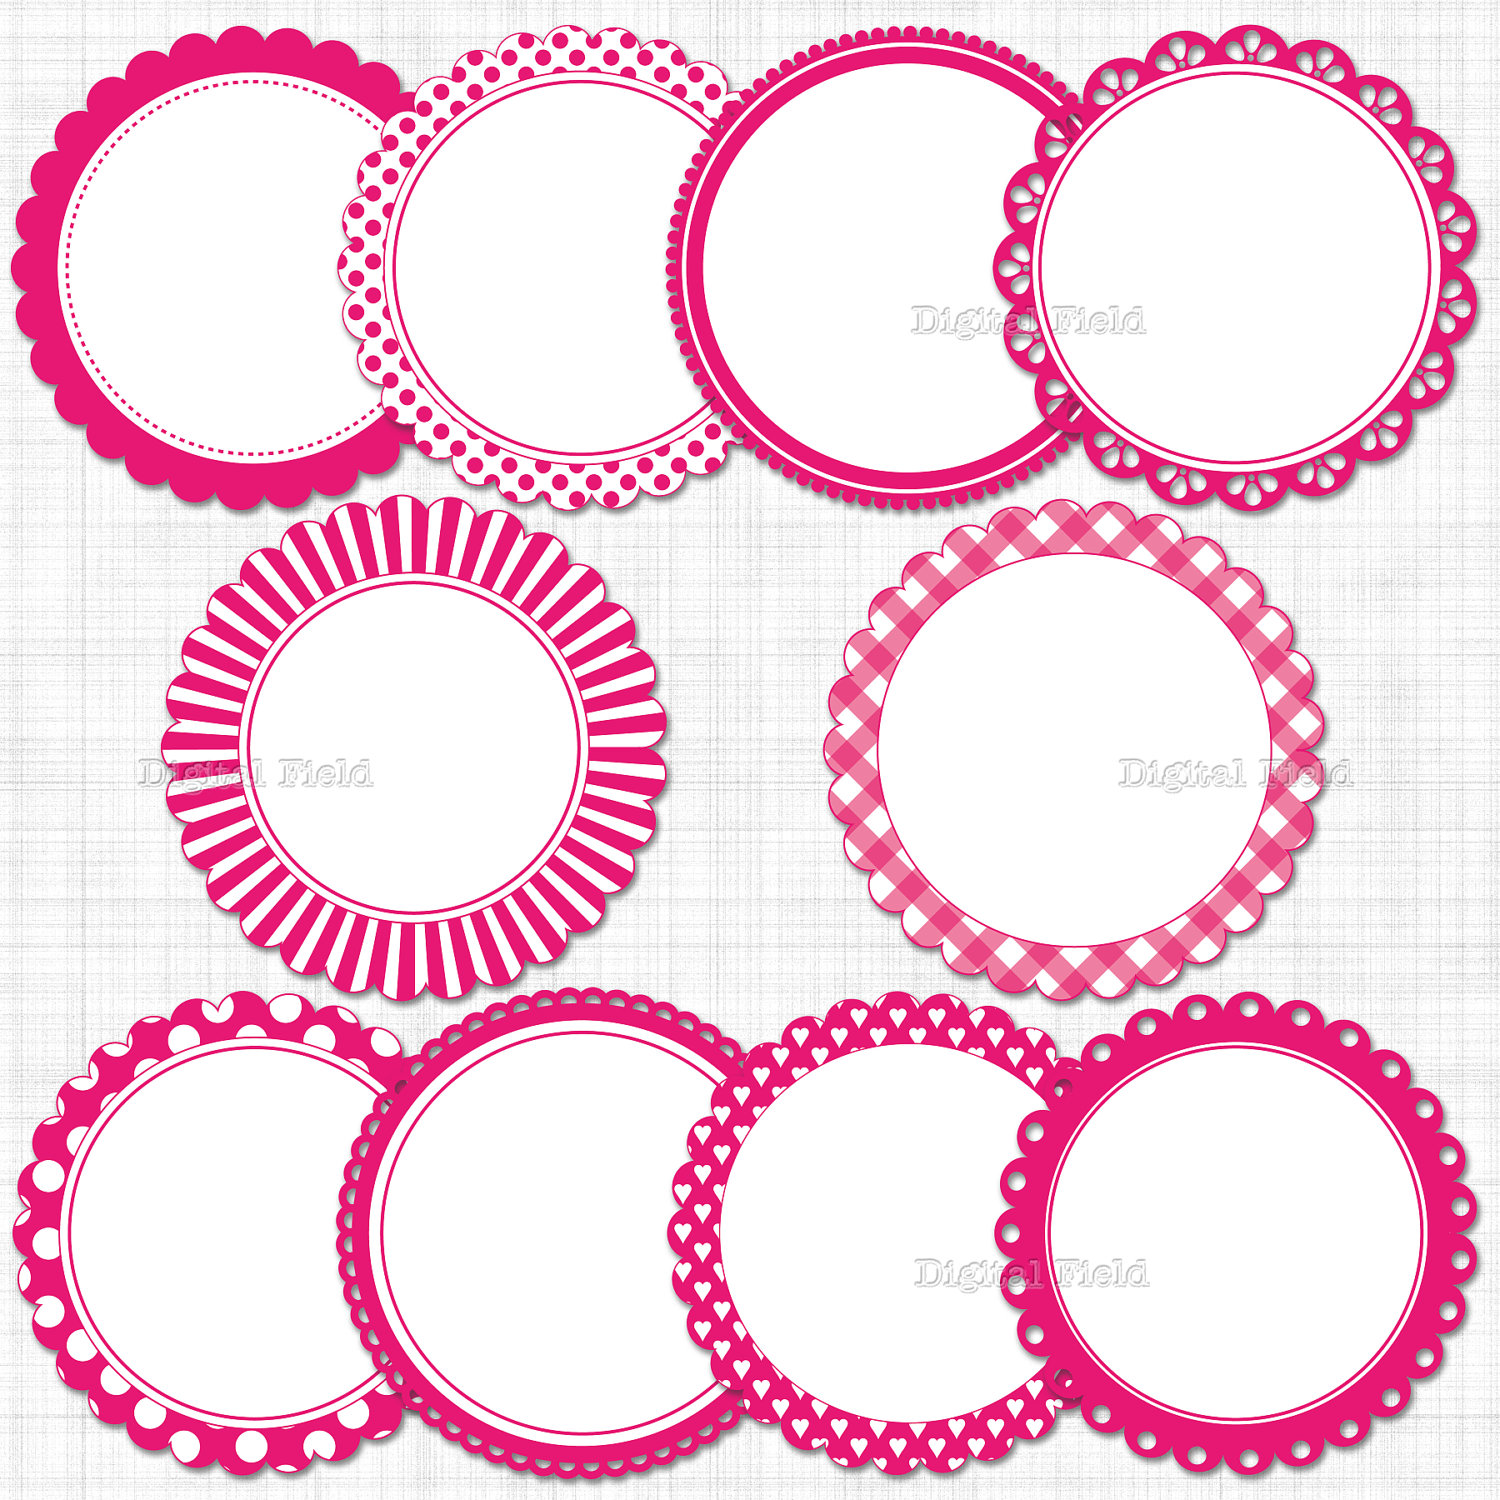 Scalloped Frame Clipart   Cliparthut   Free Clipart